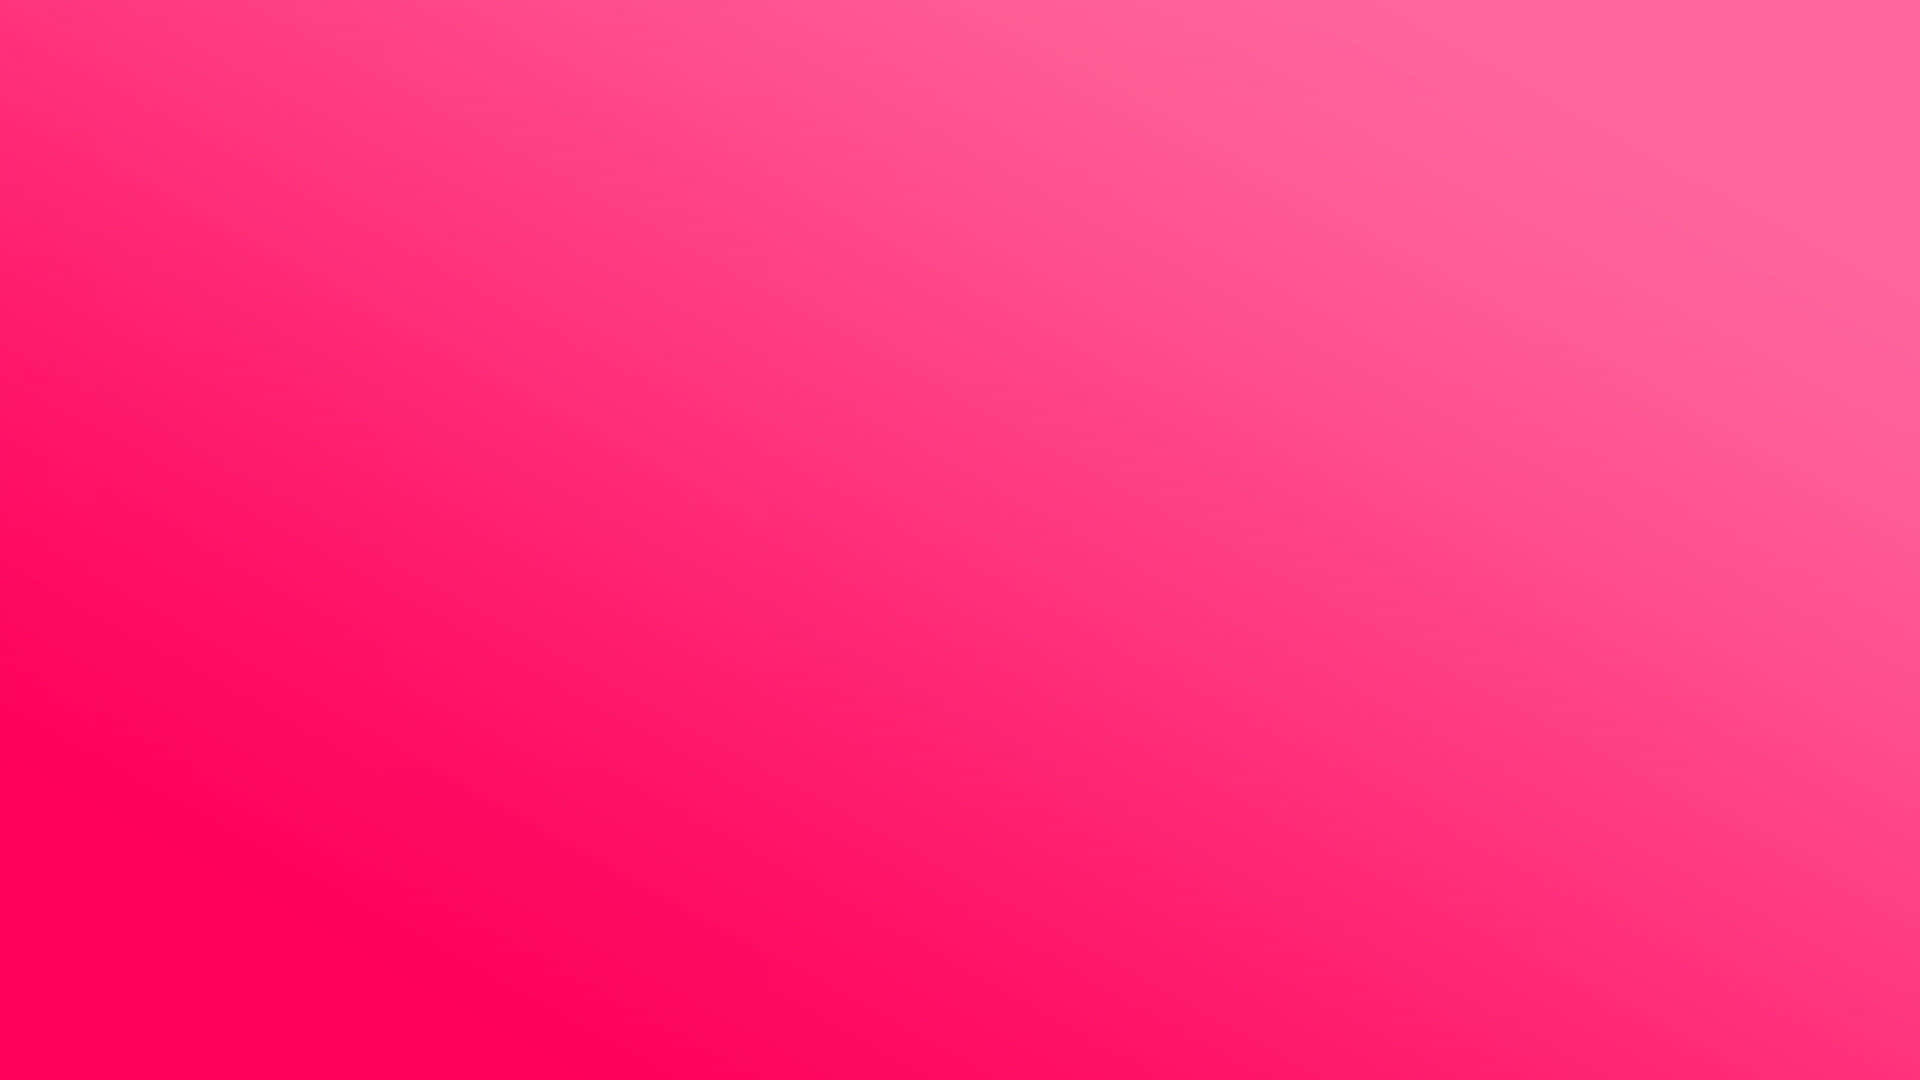 A simple, yet vibrant pink background Wallpaper